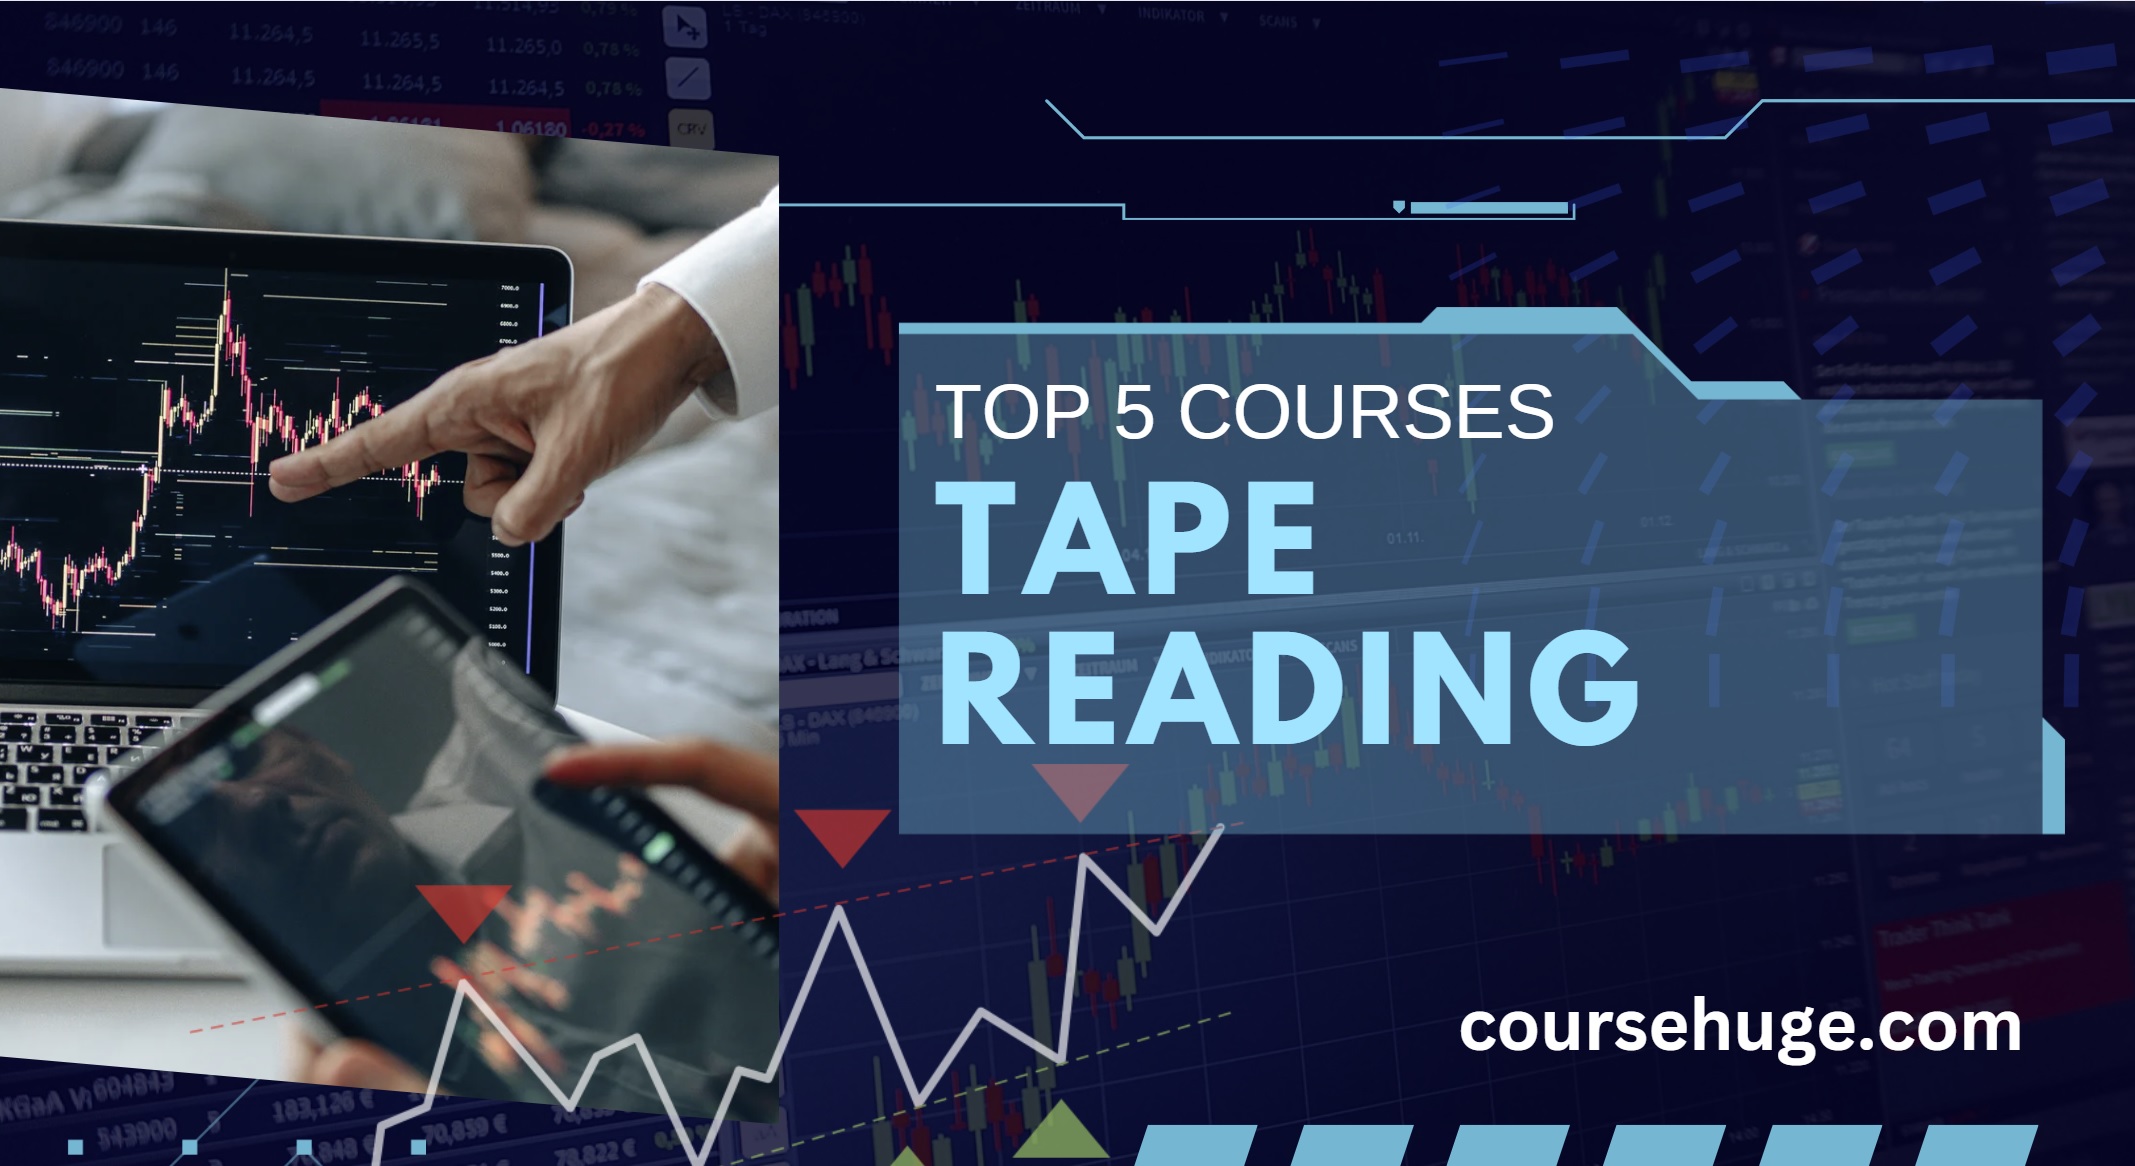 Top 5 Tape Reading Courses For Trading